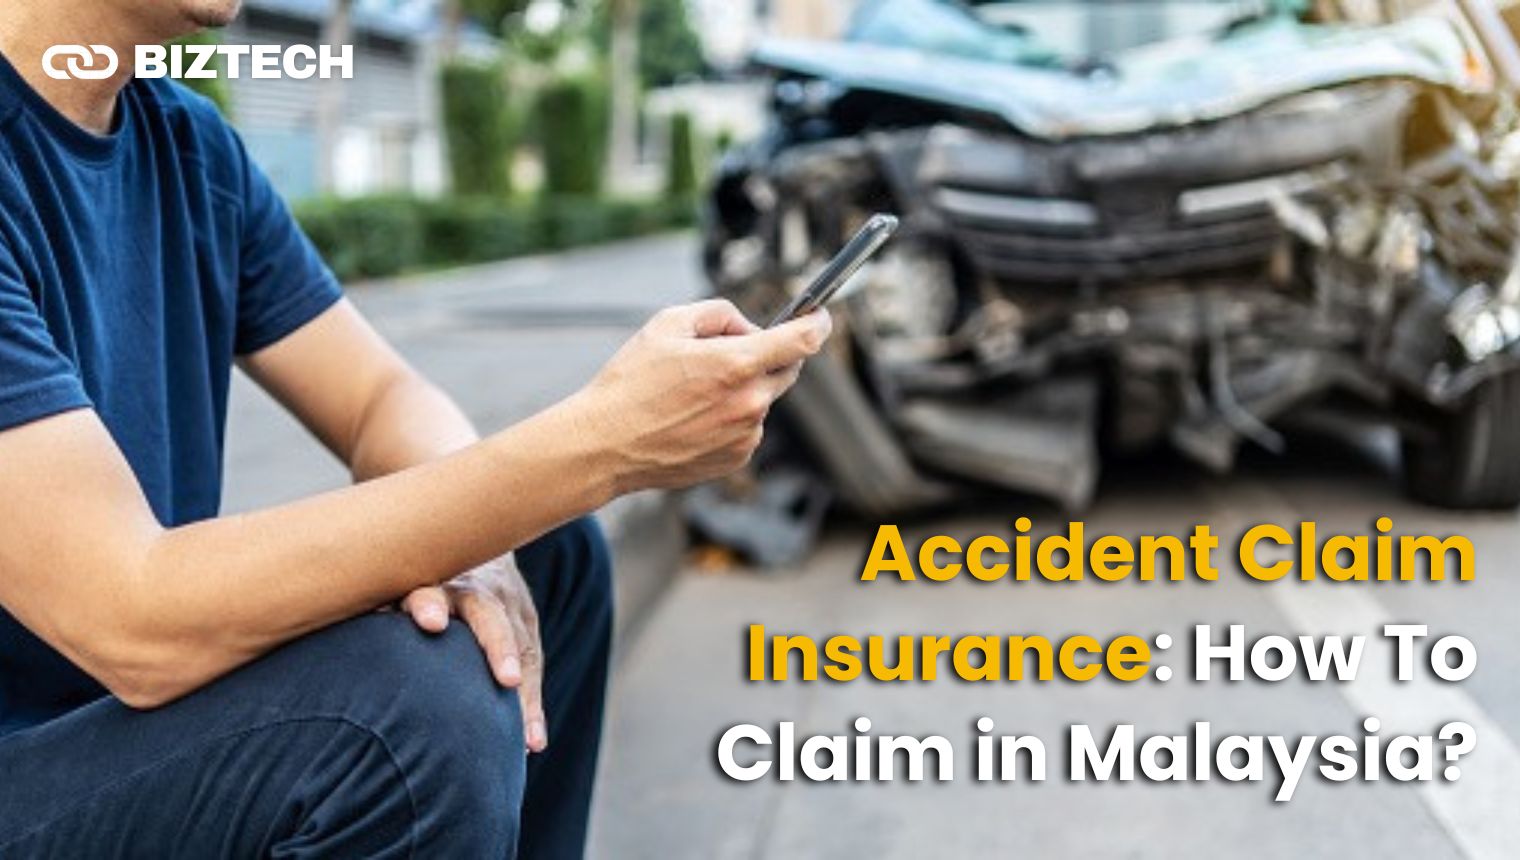 Accident Claim Insurance: How To Claim in Malaysia?